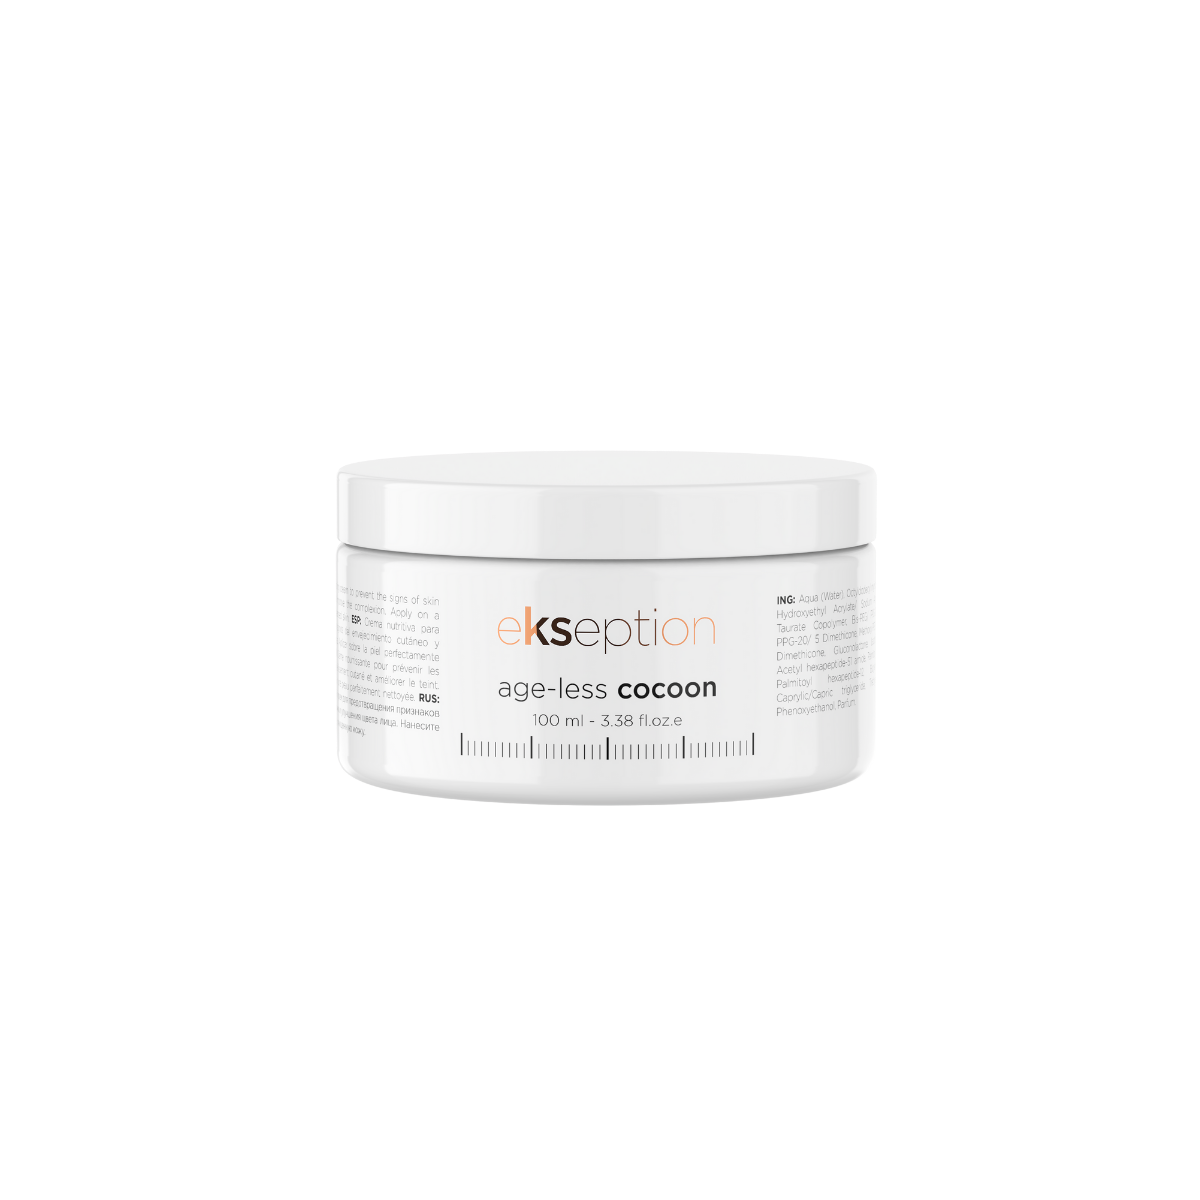 AGE-LESS COCOON 100 ML